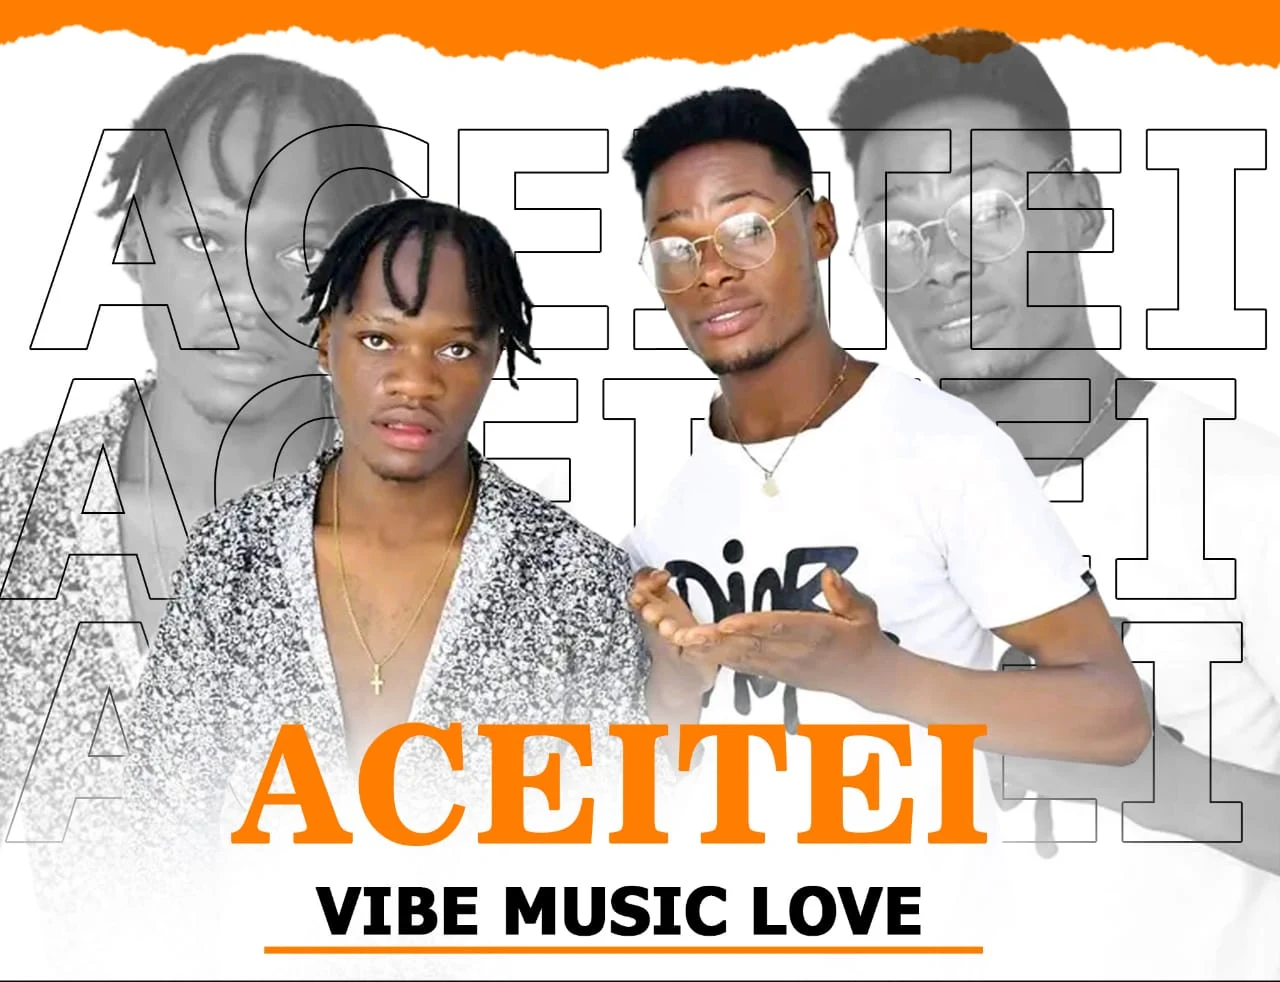 Vibe Music Love - Aceitei